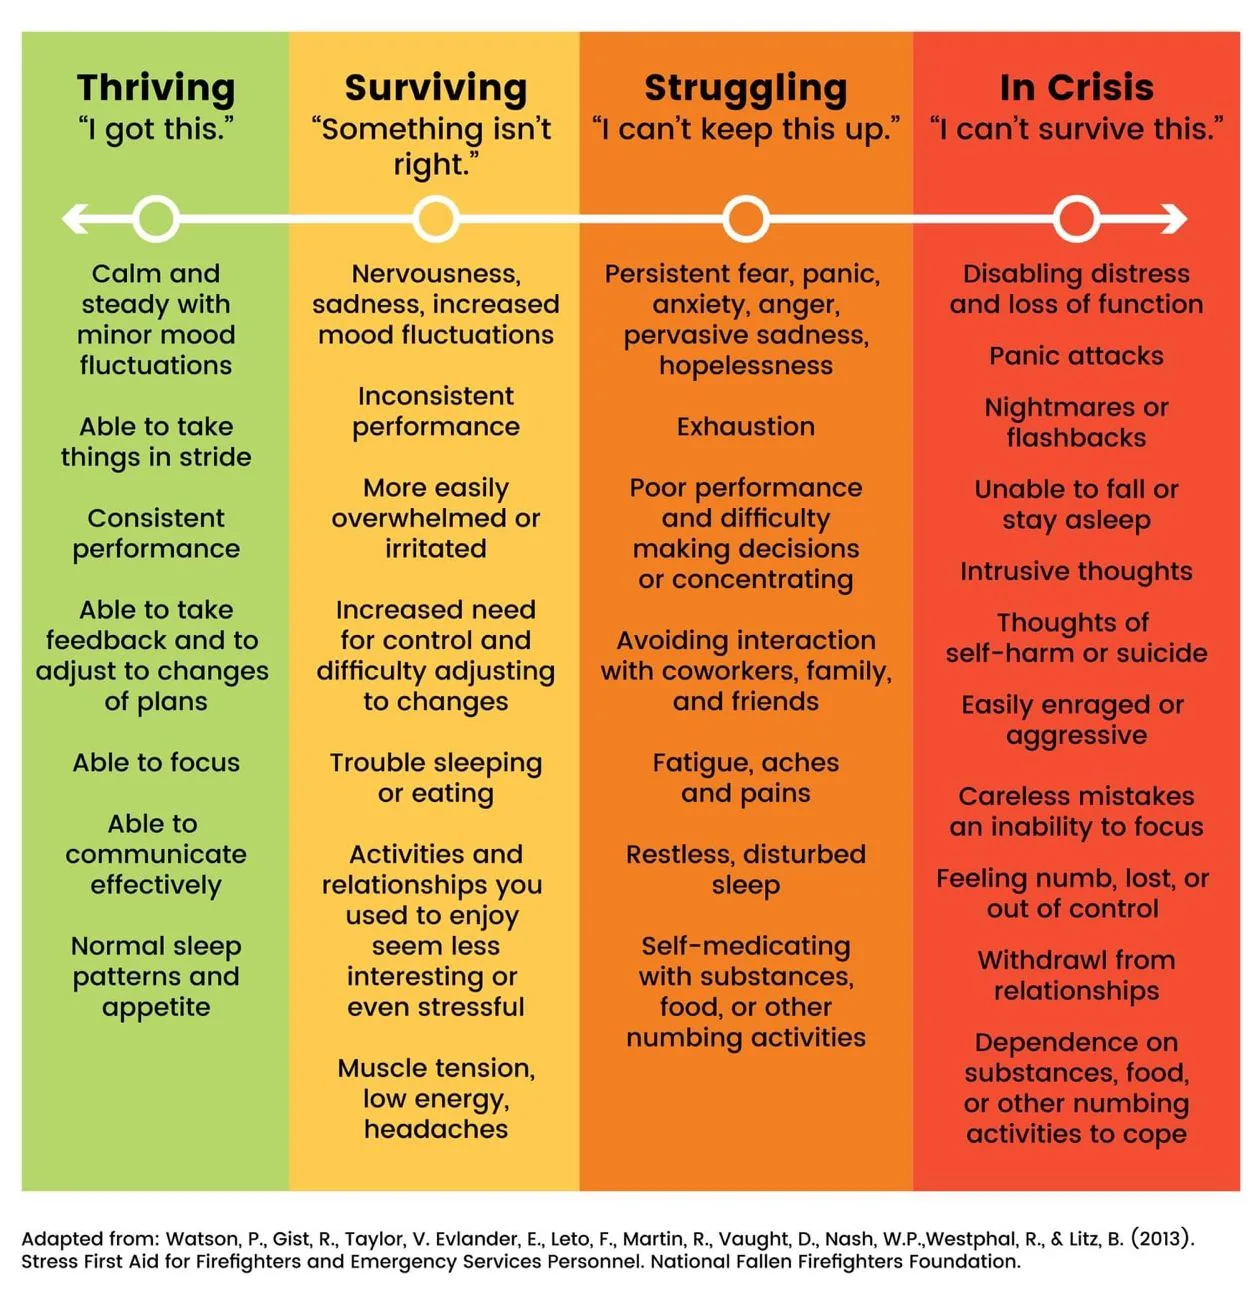 Chart of emotional and physical reactions in four states: Thriving, Surviving, Struggling, and In Crisis. 

Adapted from: Watson P, Gist, R. Taylor, V. Evlander, E., Lato, F. Martin, R. Vaught, D. Nash, W.P. Westphal, R. & Litz, B. (2013). Stress First Aid for Firefighters and Emergency Services Personnel, National Fallen Firefighters Foundation. 

Tracking your personal emotional state, as well as your teams, during a crisis is an important part of Business Crisis Management.